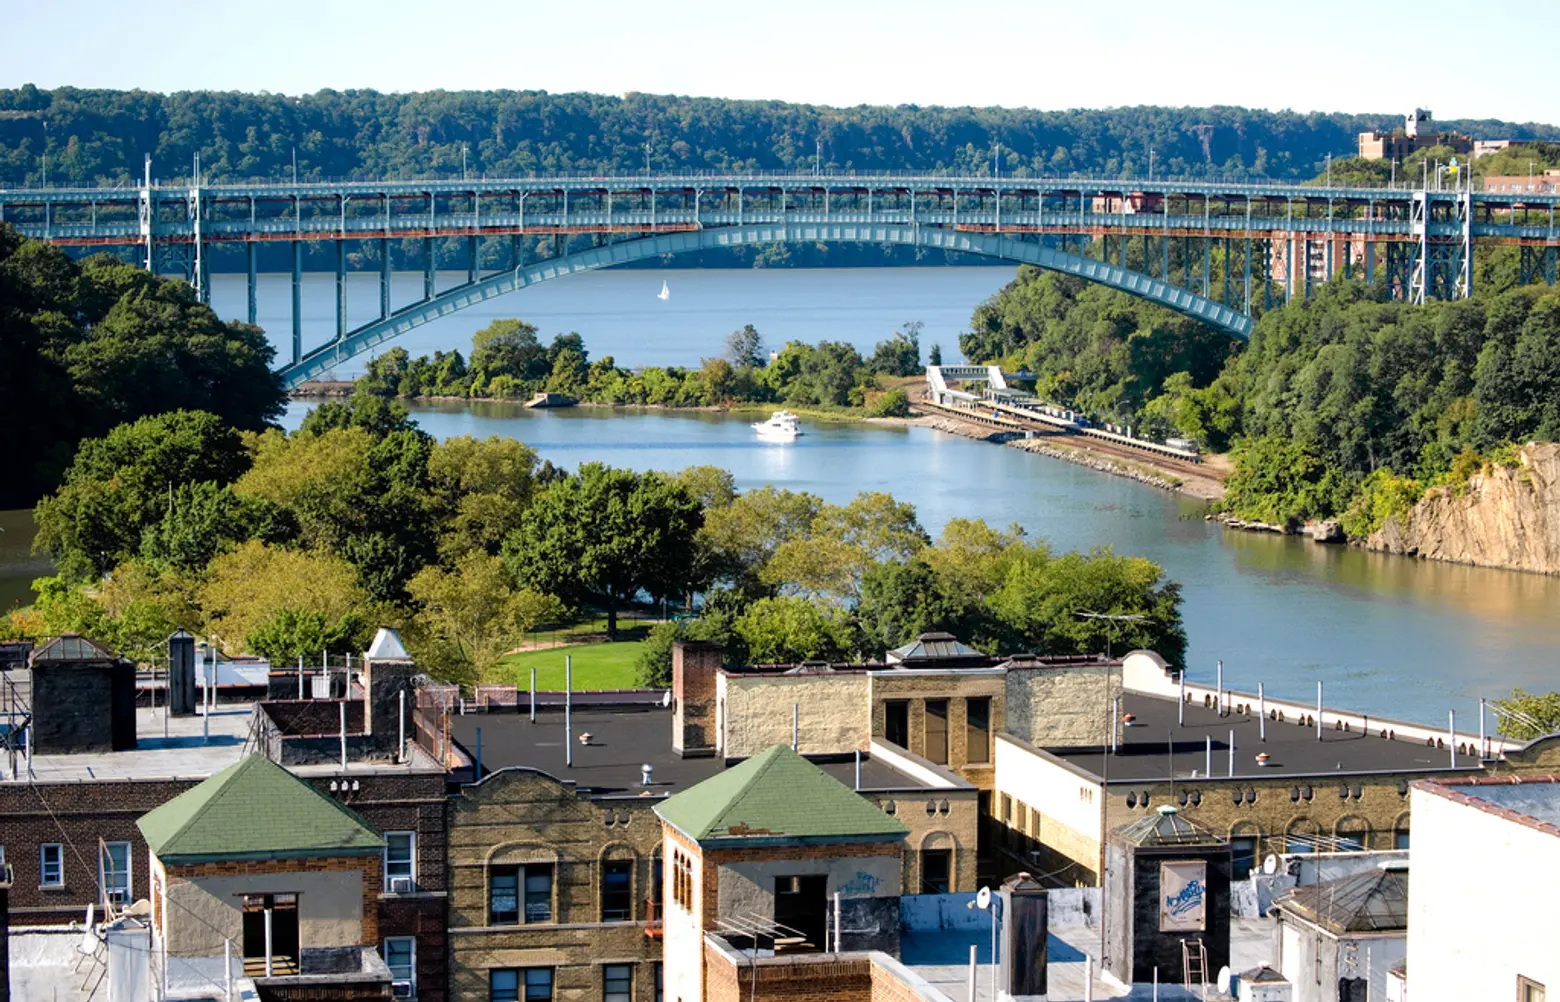 Inwood rezoning plan can move forward, appeals court rules